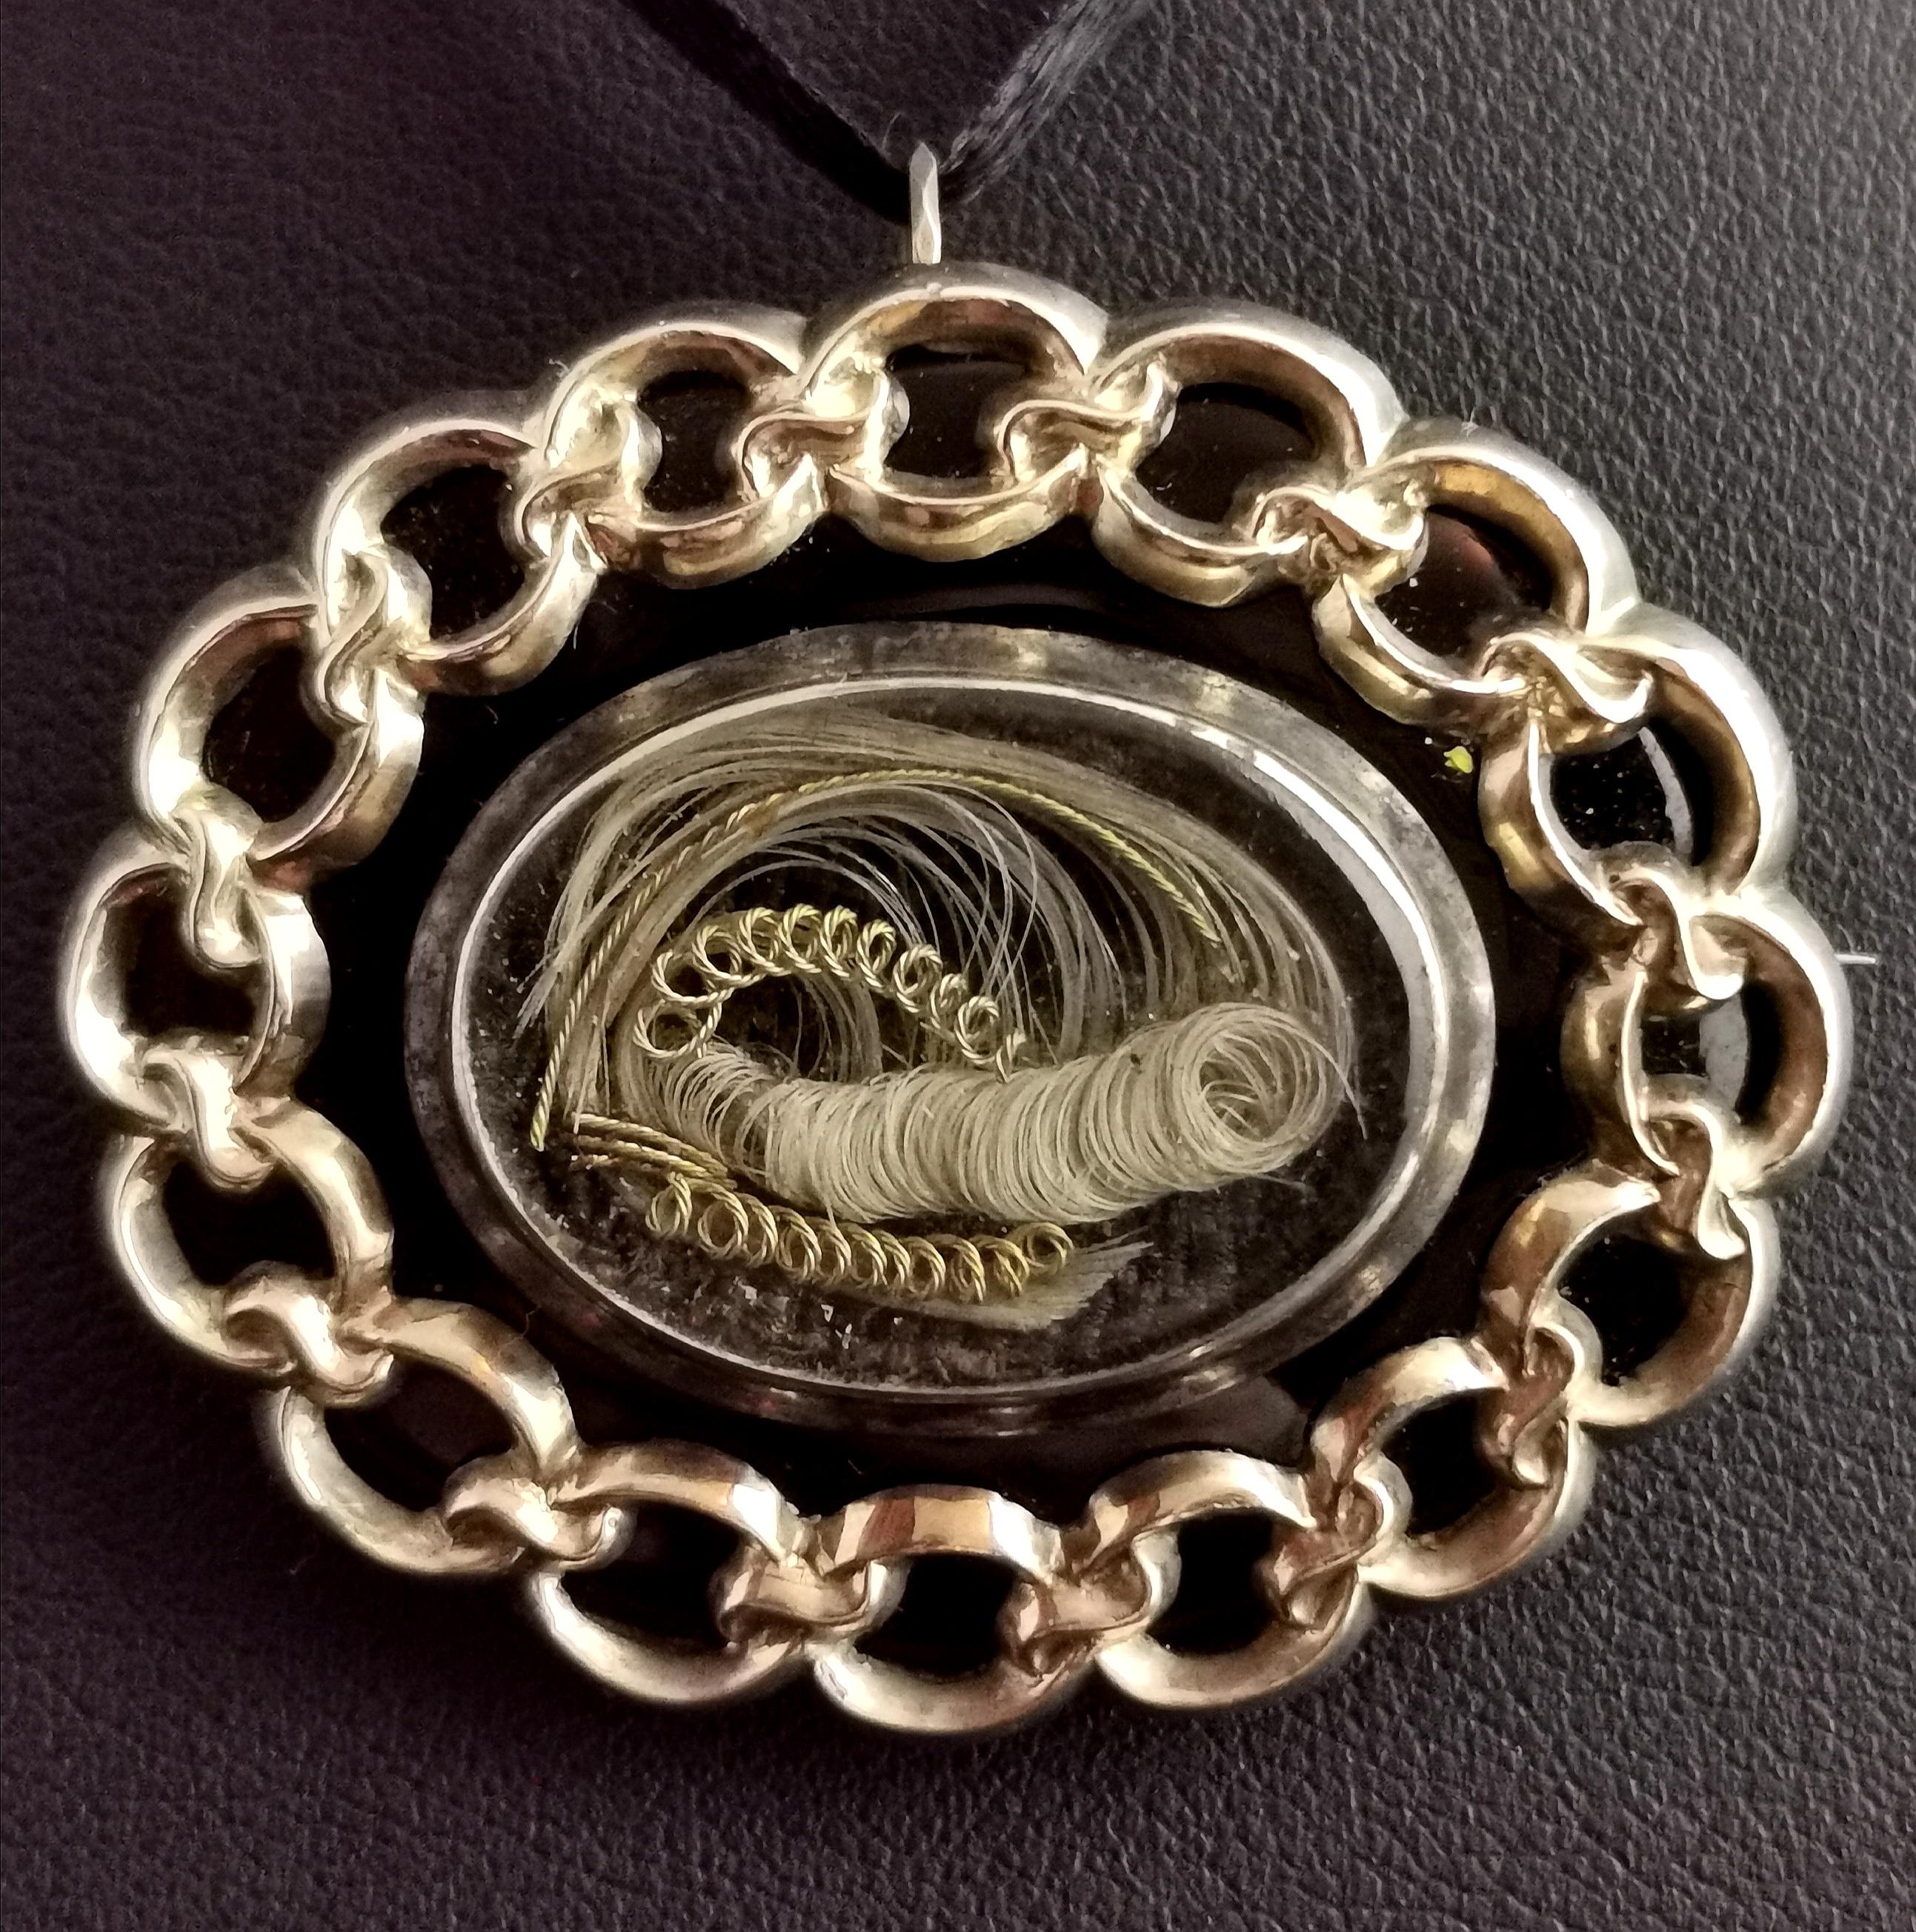 A stunning antique Victorian mourning pendant brooch, a beautifully made piece that is full of sentiment.

It is an oval shaped brooch in 9kt yellow gold with a central glazed panel with a hairwork section holding a stylised lock of blonde hair with